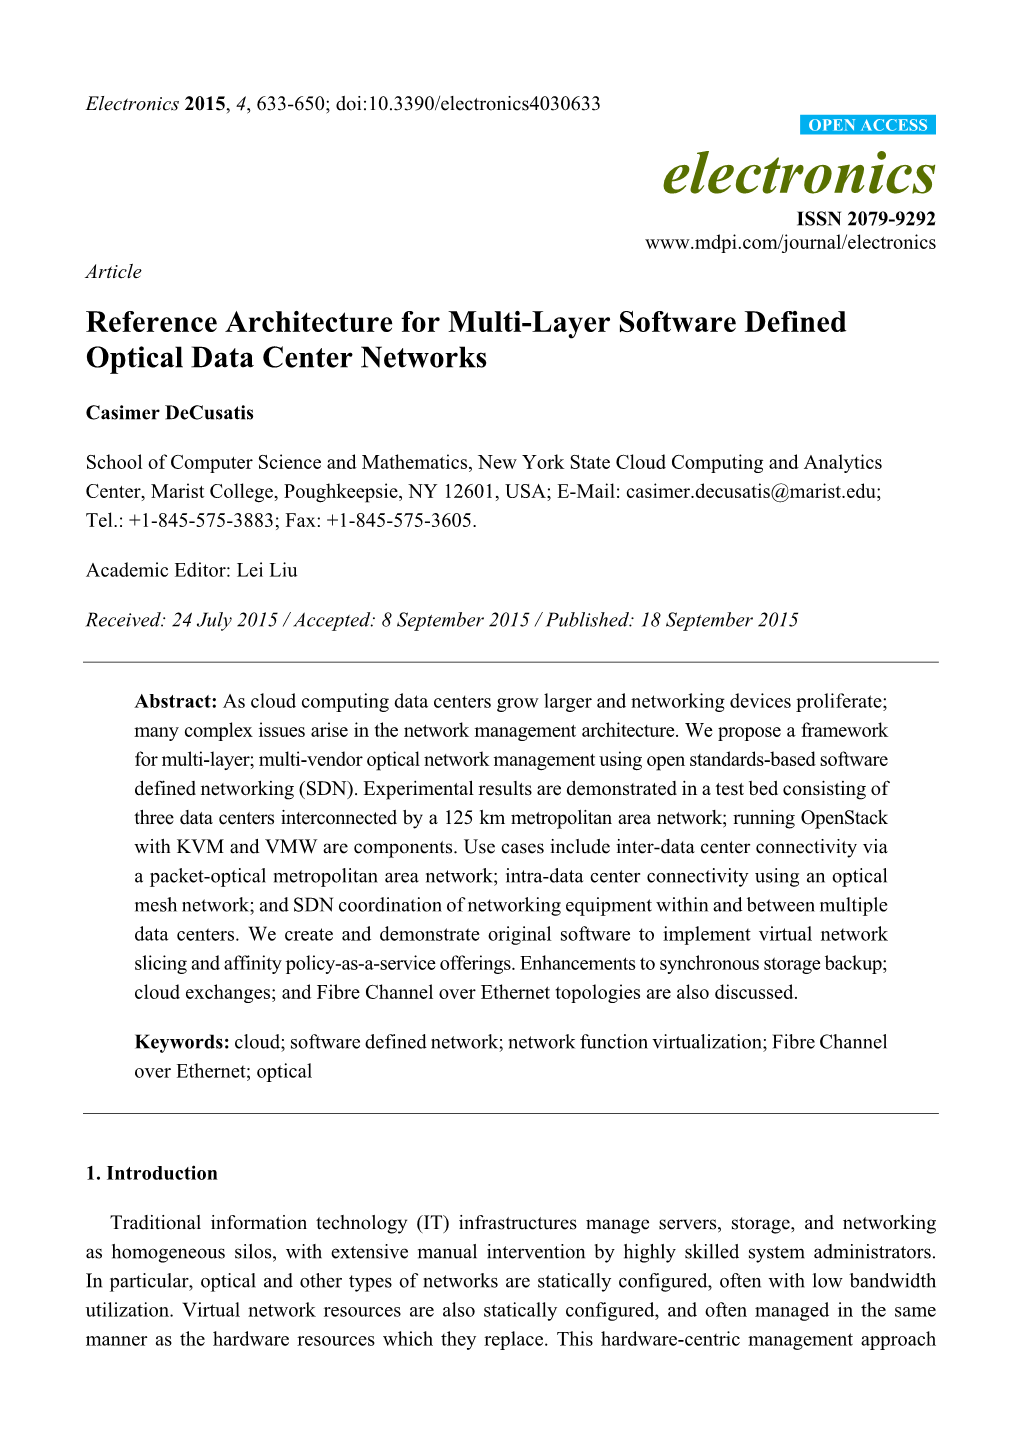 Reference Architecture for Multi-Layer Software Defined Optical Data Center Networks